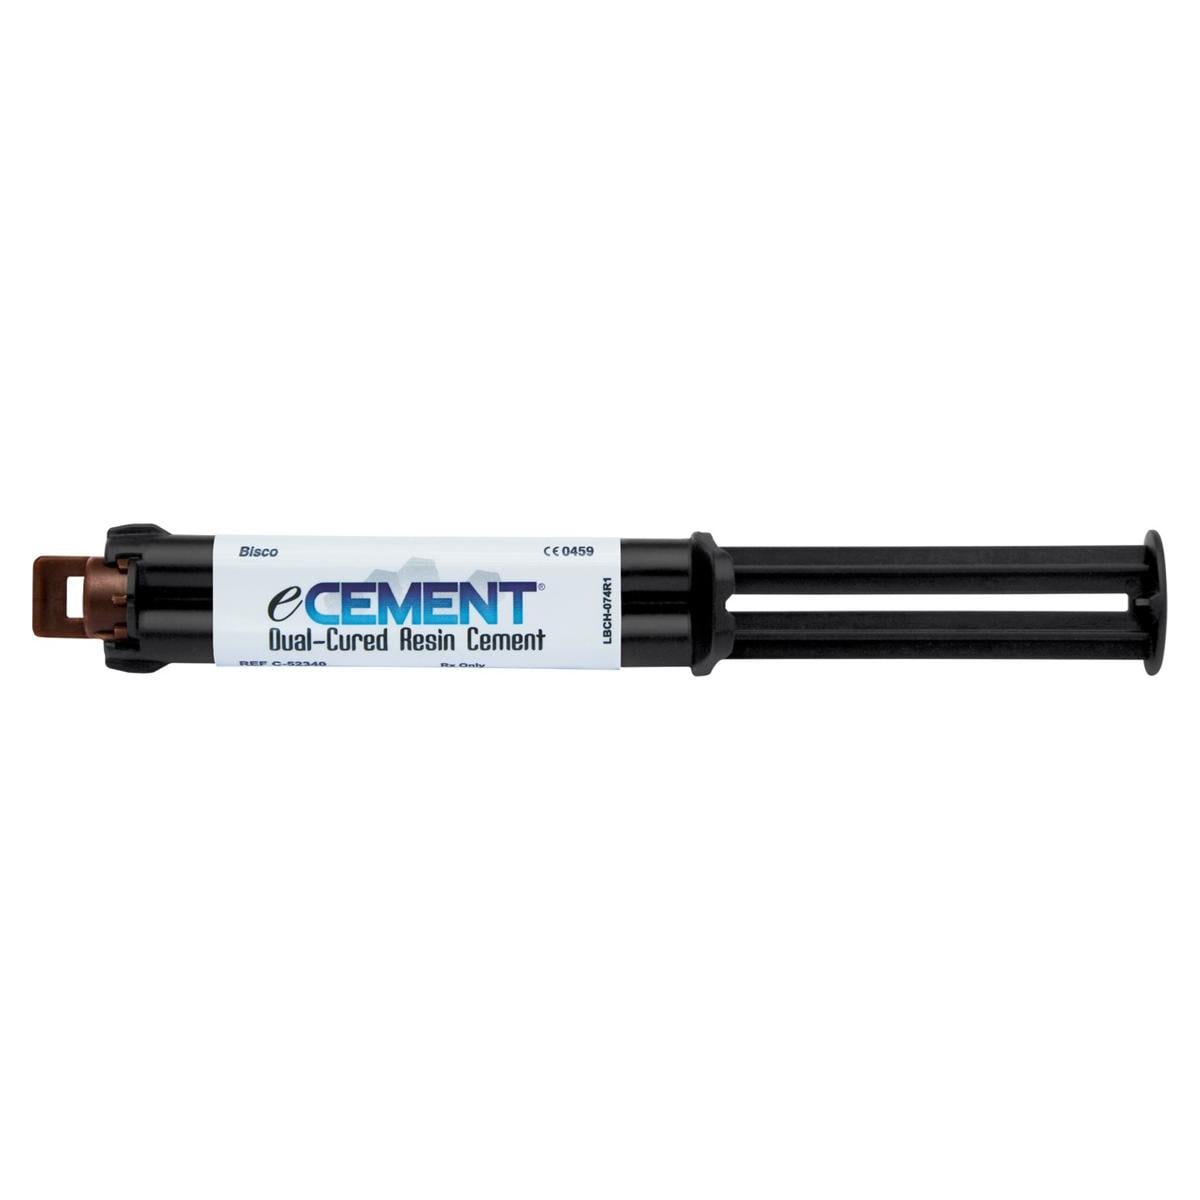 eCement - Dual-Cured Dual-Syringe